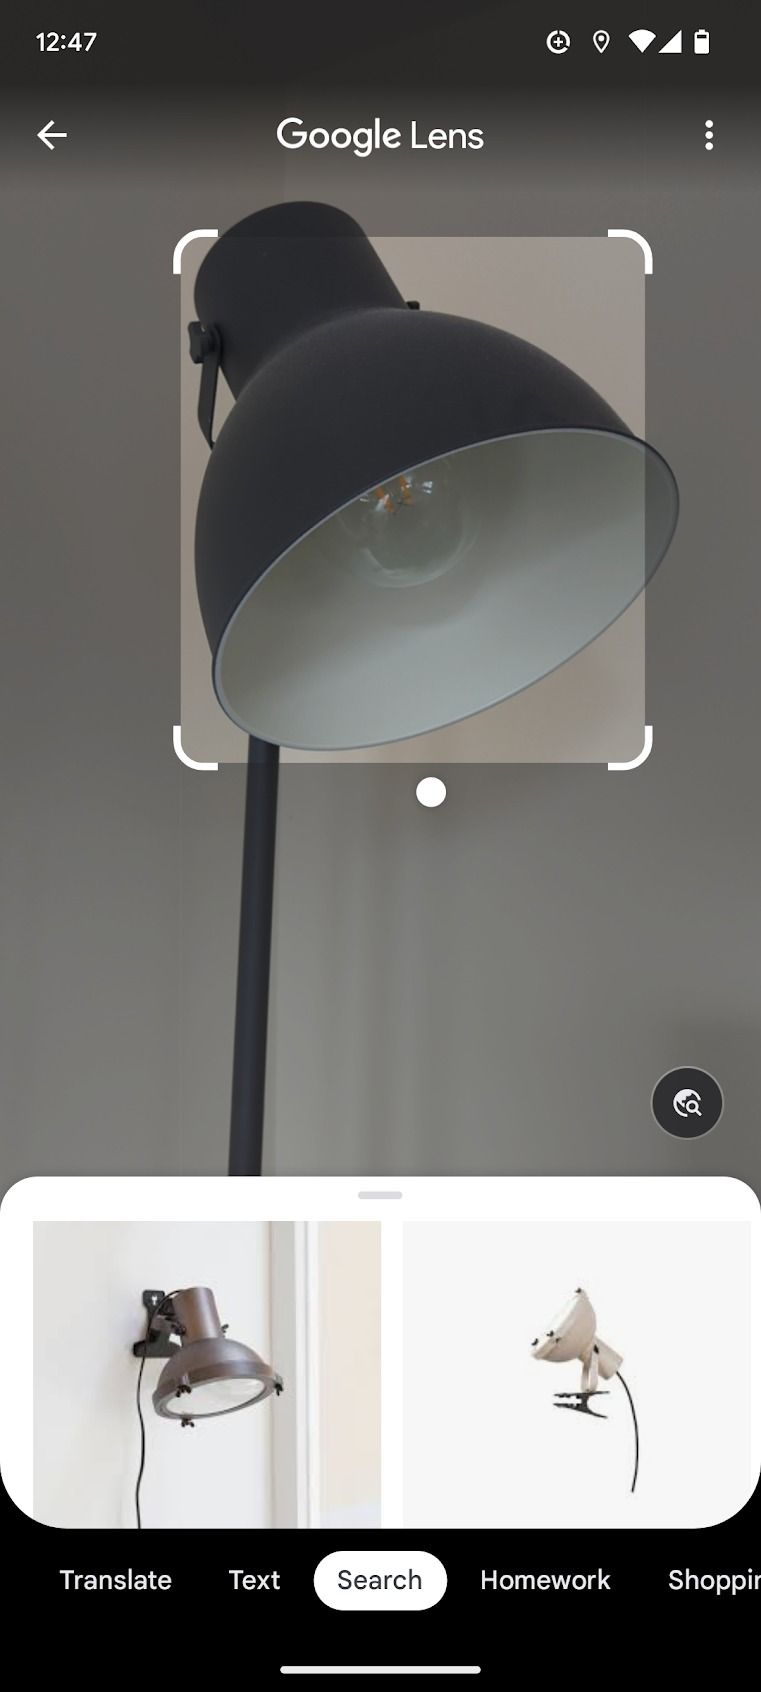 A screenshot of the Google Lens app is displayed, showing the results of scanning a lamp.